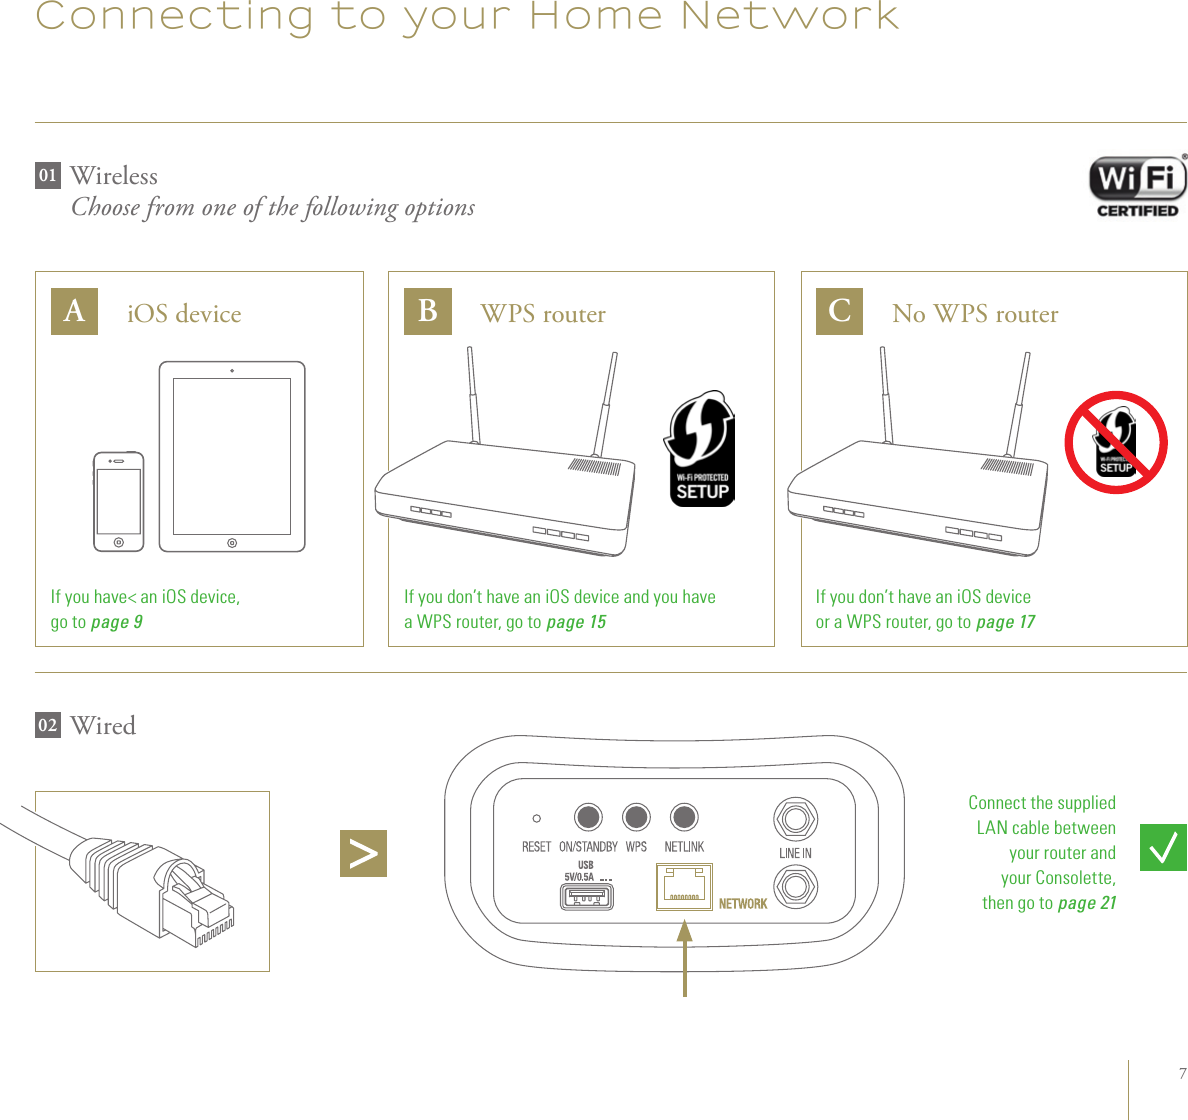 7Connecting to your Home NetworkWireless Choose from one of the following optionsIf you have&lt; an iOS device,  go to page 9If you don’t have an iOS device and you have  a WPS router, go to page 15If you don’t have an iOS device  or a WPS router, go to page 17A B CWired0201iOS device WPS router No WPS routerConnect the supplied  LAN cable between  your router and  your Consolette,  then go to page 21